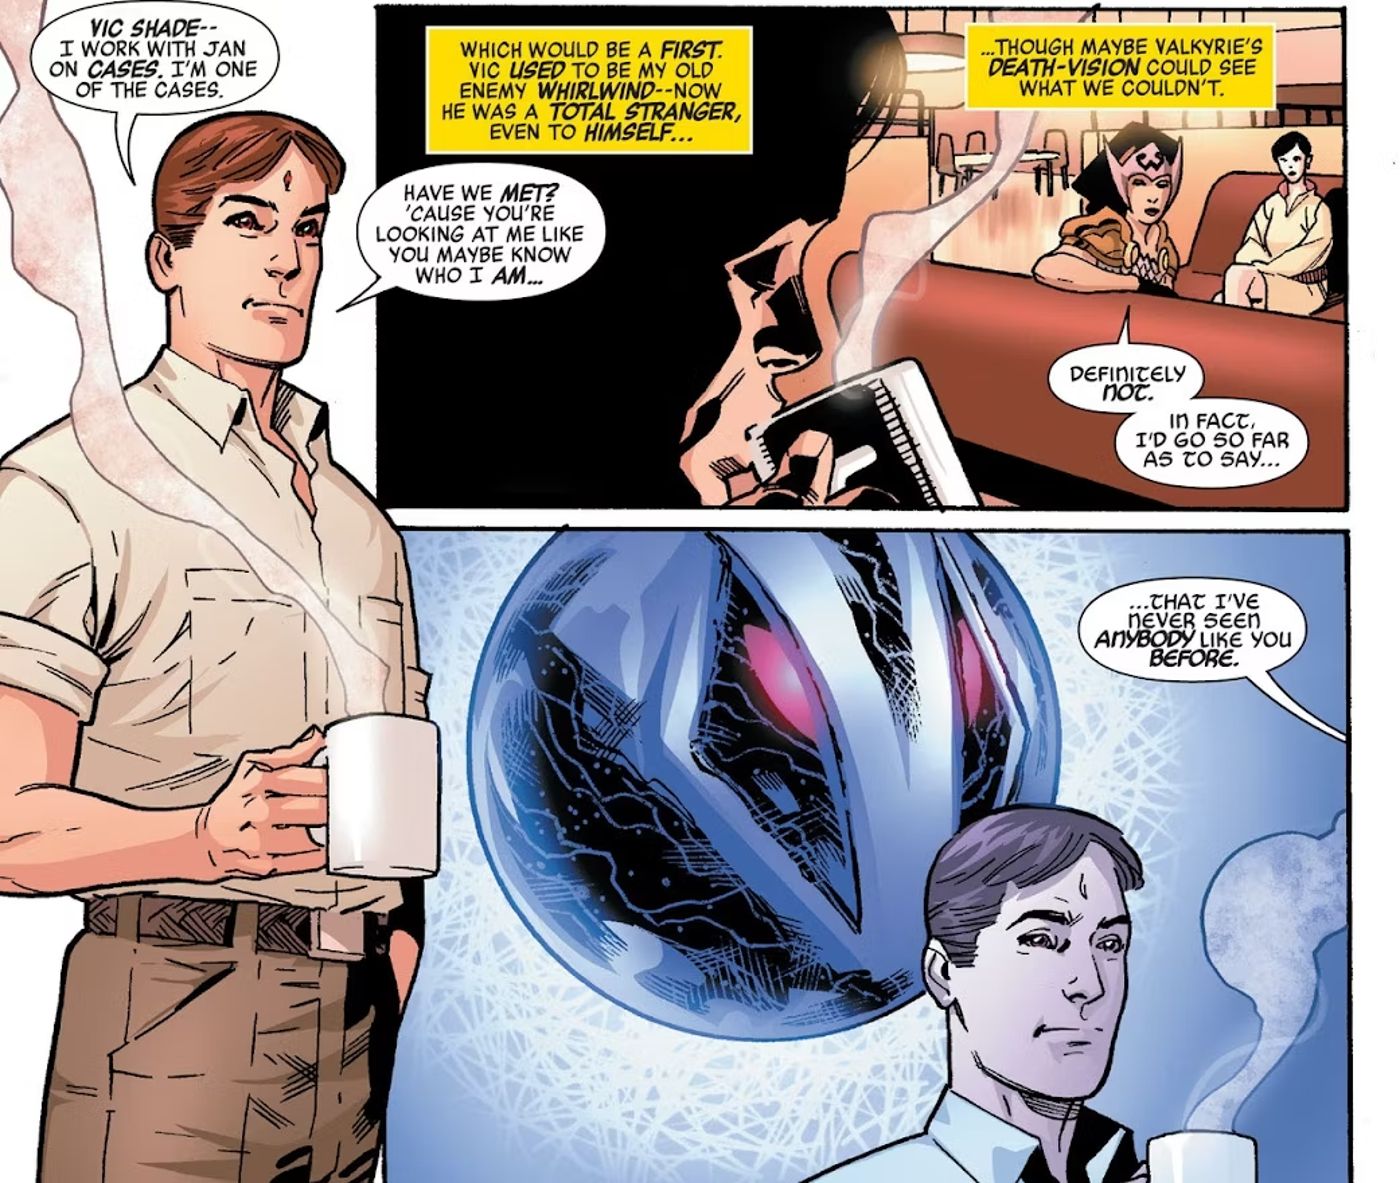 panels from Avengers Inc #3, Vic Shade introduces himself to Valkyrie